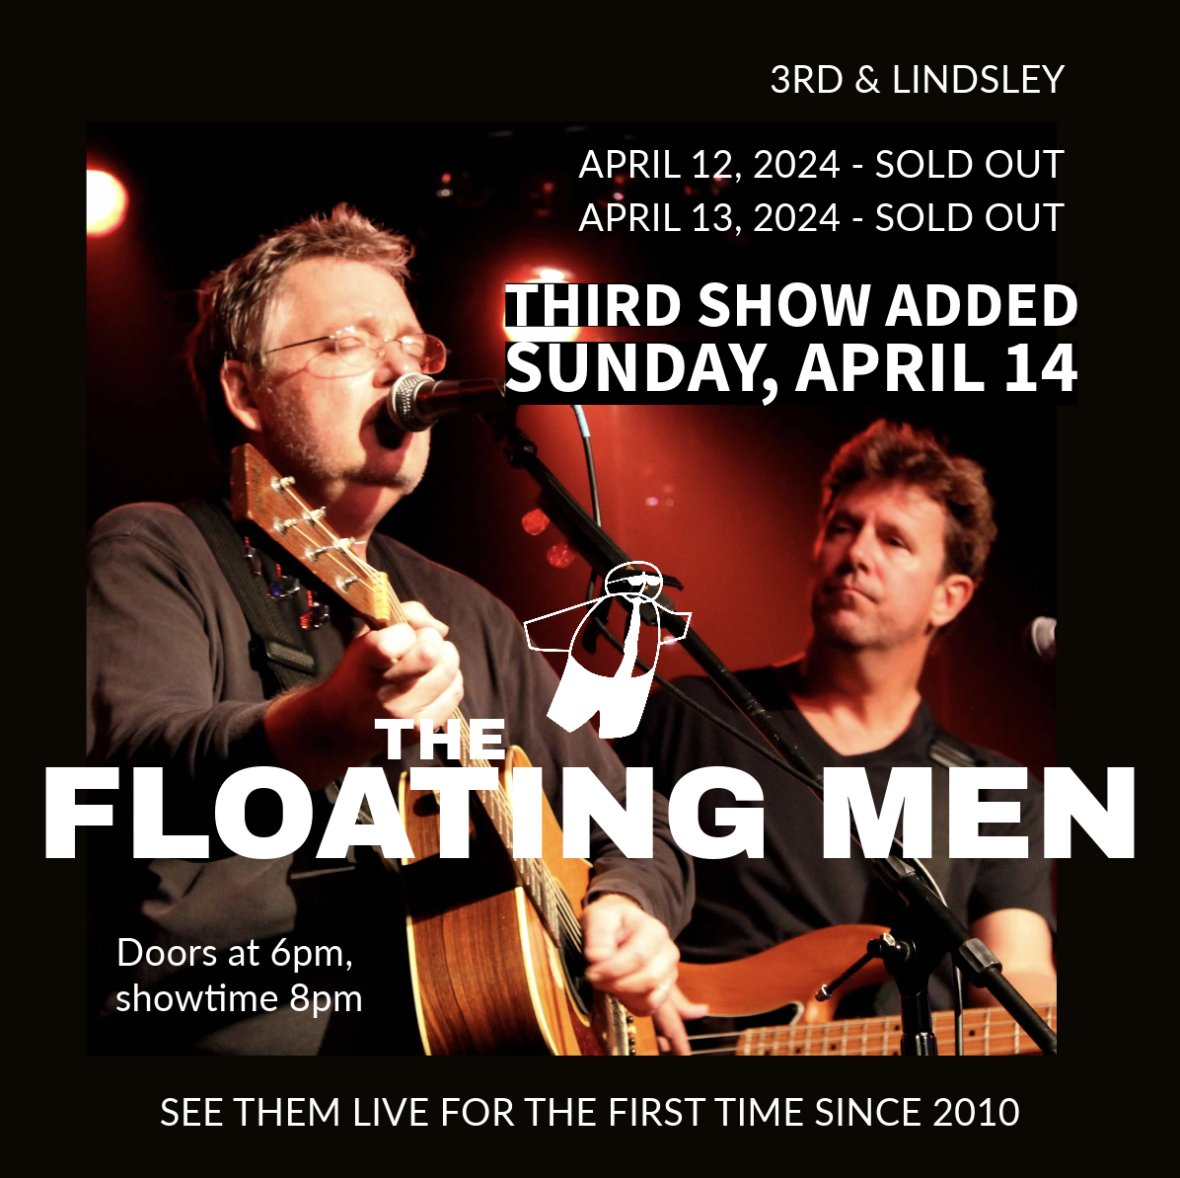 Playing together for the first time since 2010, this week we have a sold out #NashvilleSundayNight with @floatingmen! Missed out on tickets? You can still join the fun by tuning in to 100.1, or streaming the performance live on @GetOnVolume! NSN is sponsored by @JackDaniels_US